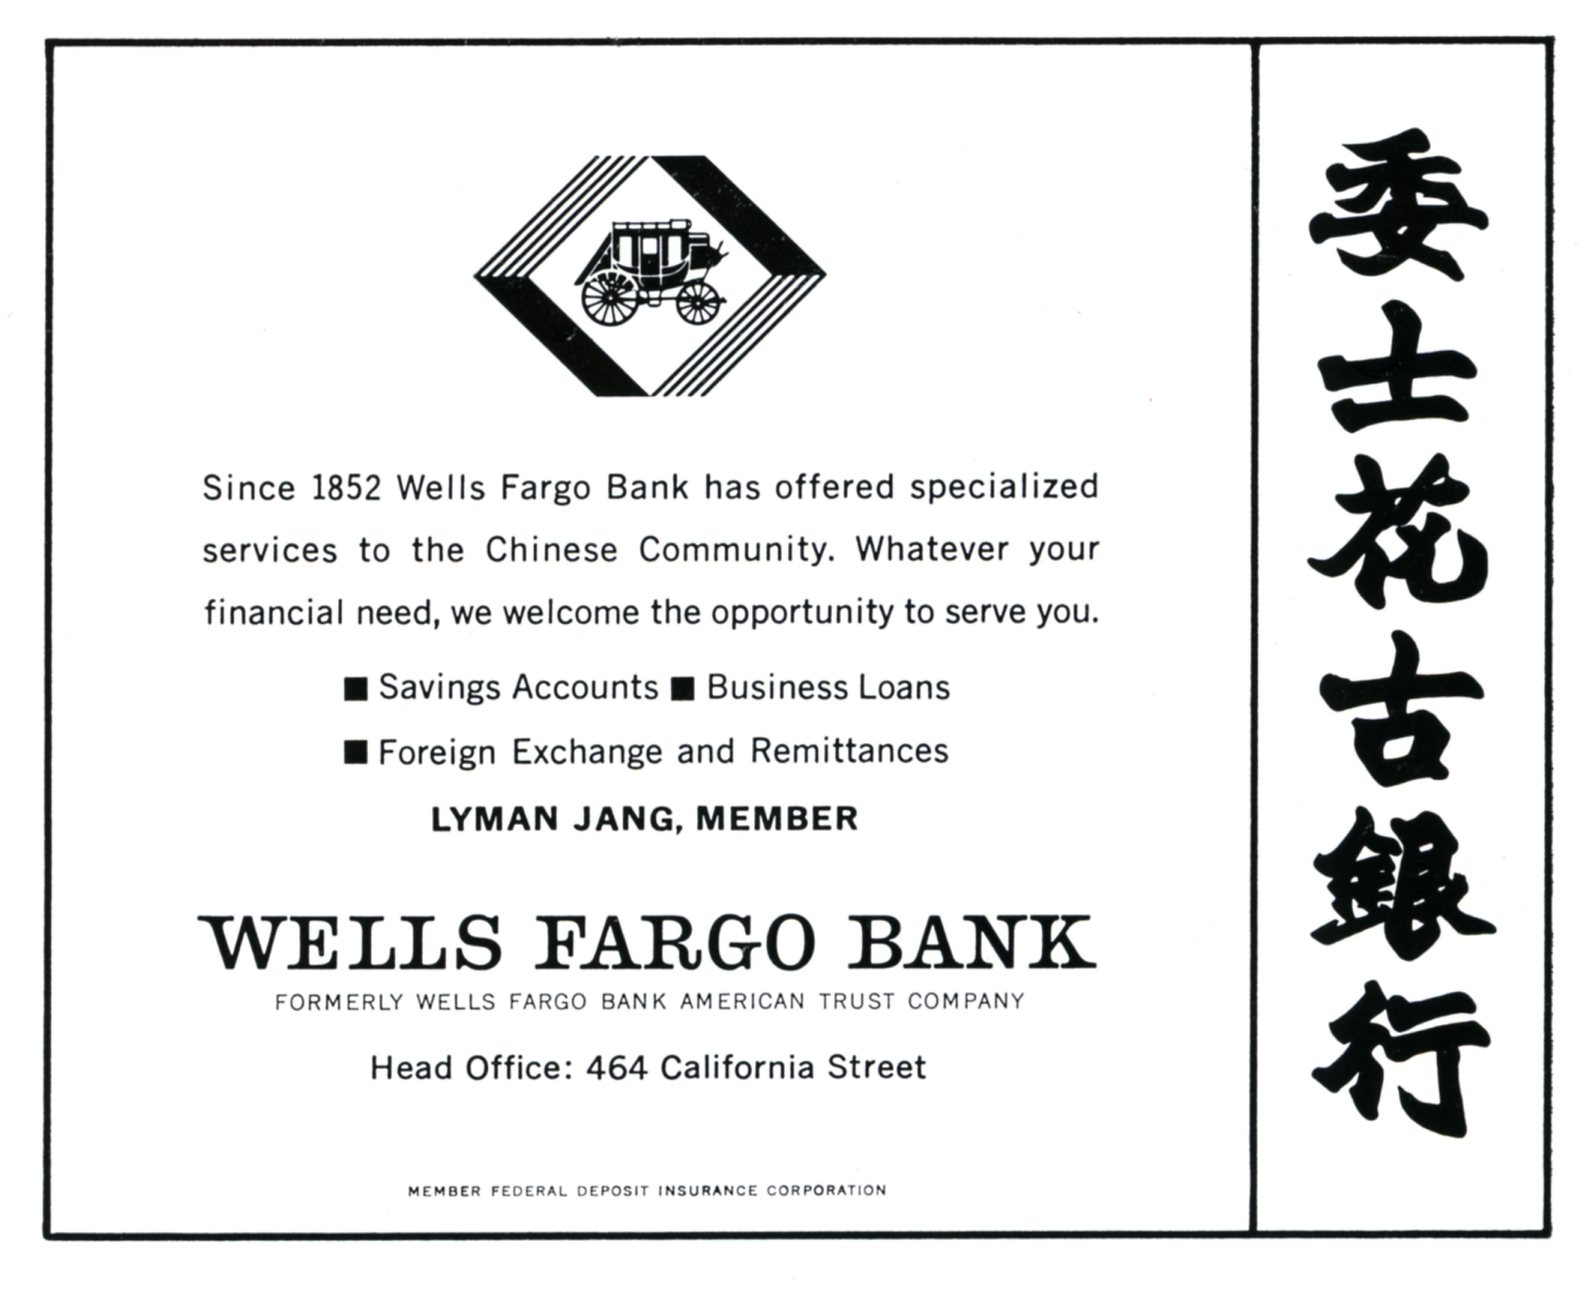 Advertisement for Wells Fargo Bank with bank name in both English and Chinese. In English the ad reads Since 1852 Wells Fargo Bank has offered specialized services to the Chinese Community. Whatever your financial need, we welcome the opportunity to serve you.